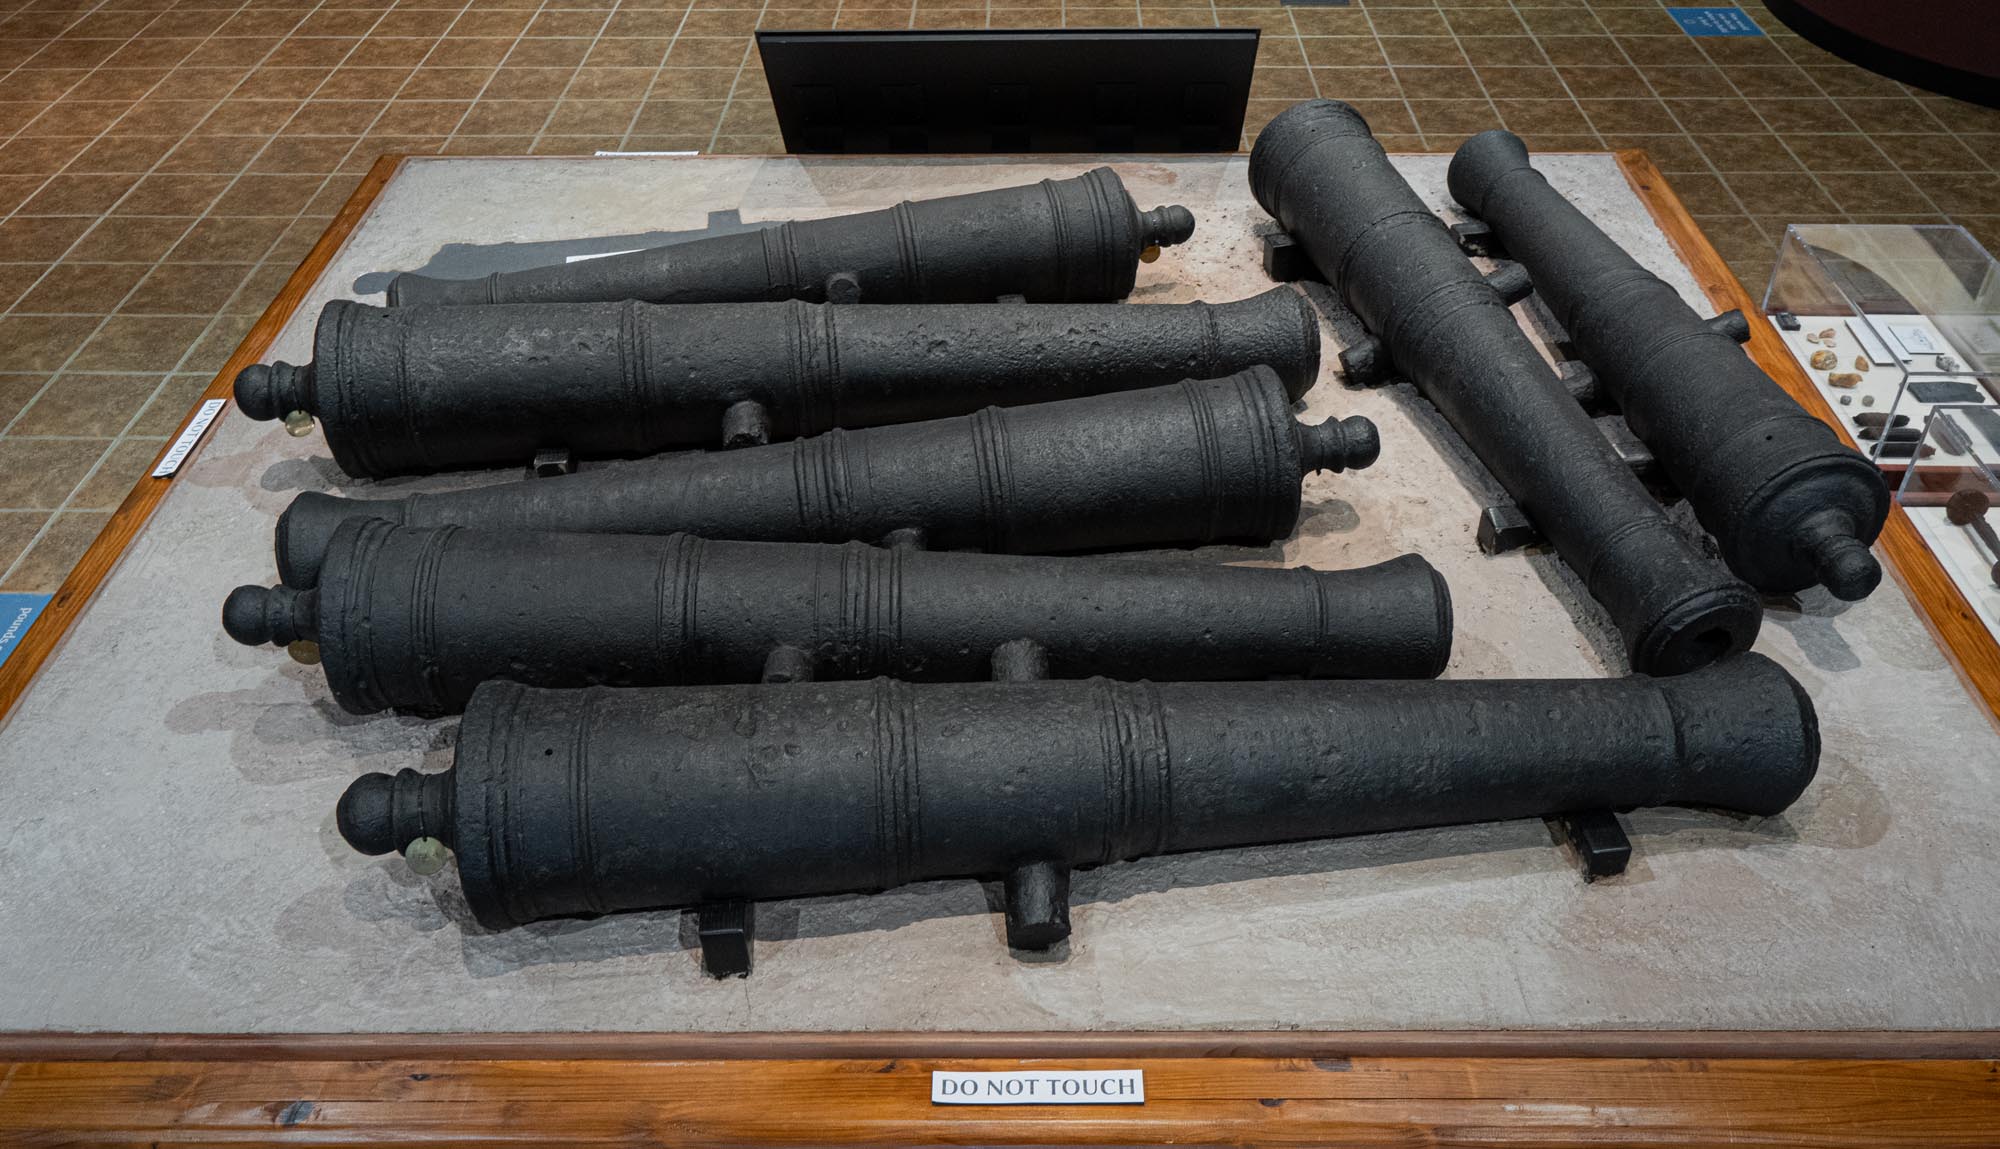 Eight iron cannons were found in the same position in which they were buried by the Spanish when they first discovered the remains of Fort St. Louis in 1689. Museum of the Coastal Bend Victoria, TX